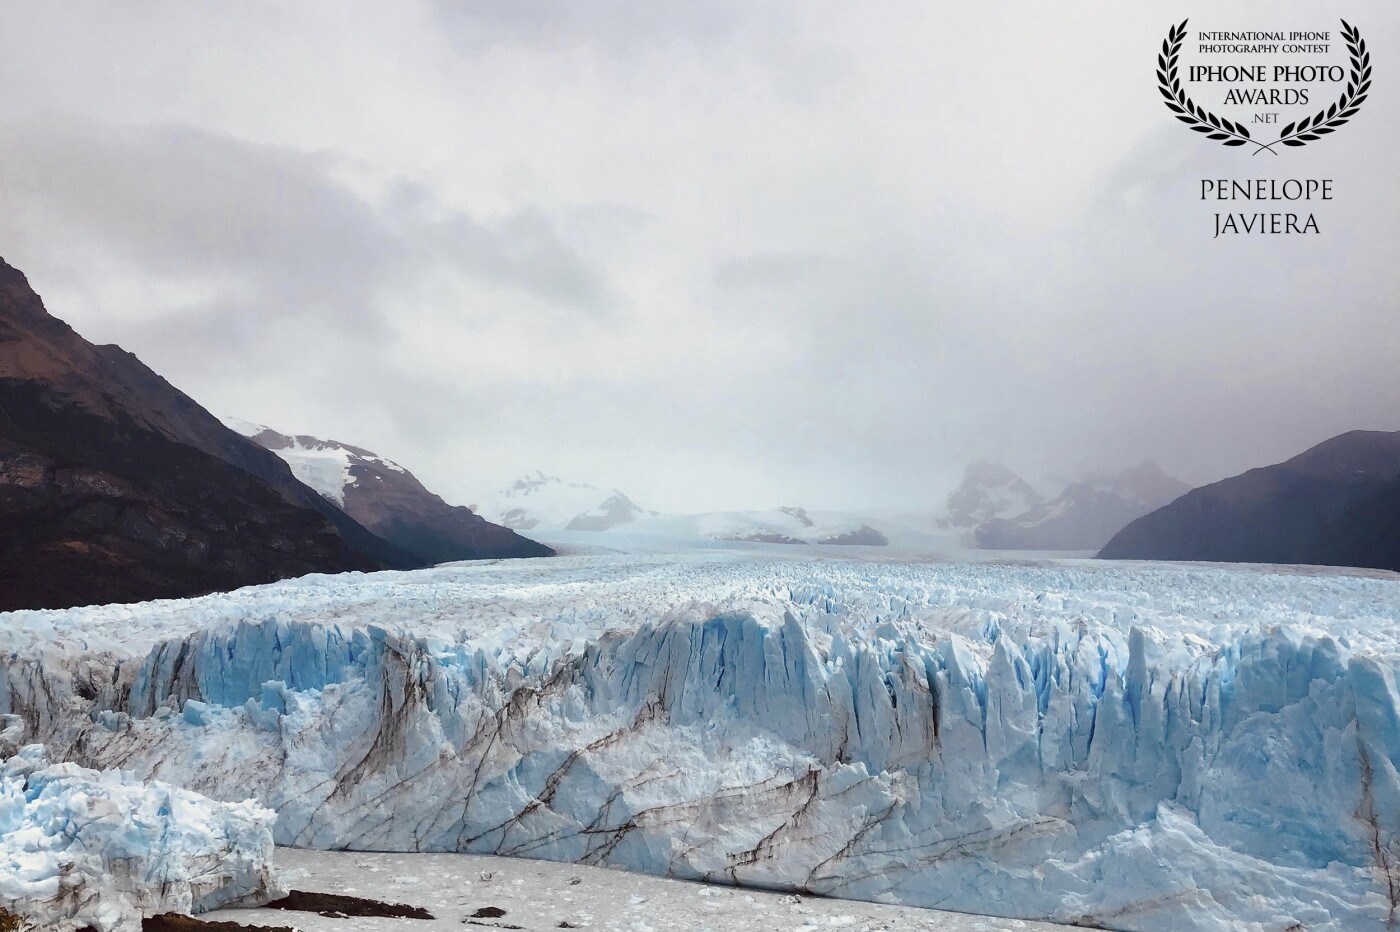 Glacier Perito Moreno located in the patagonia Argentina in the city of Calafate it is necessary to emphasize that it is the only glacier that recovers its size after the constant detachments